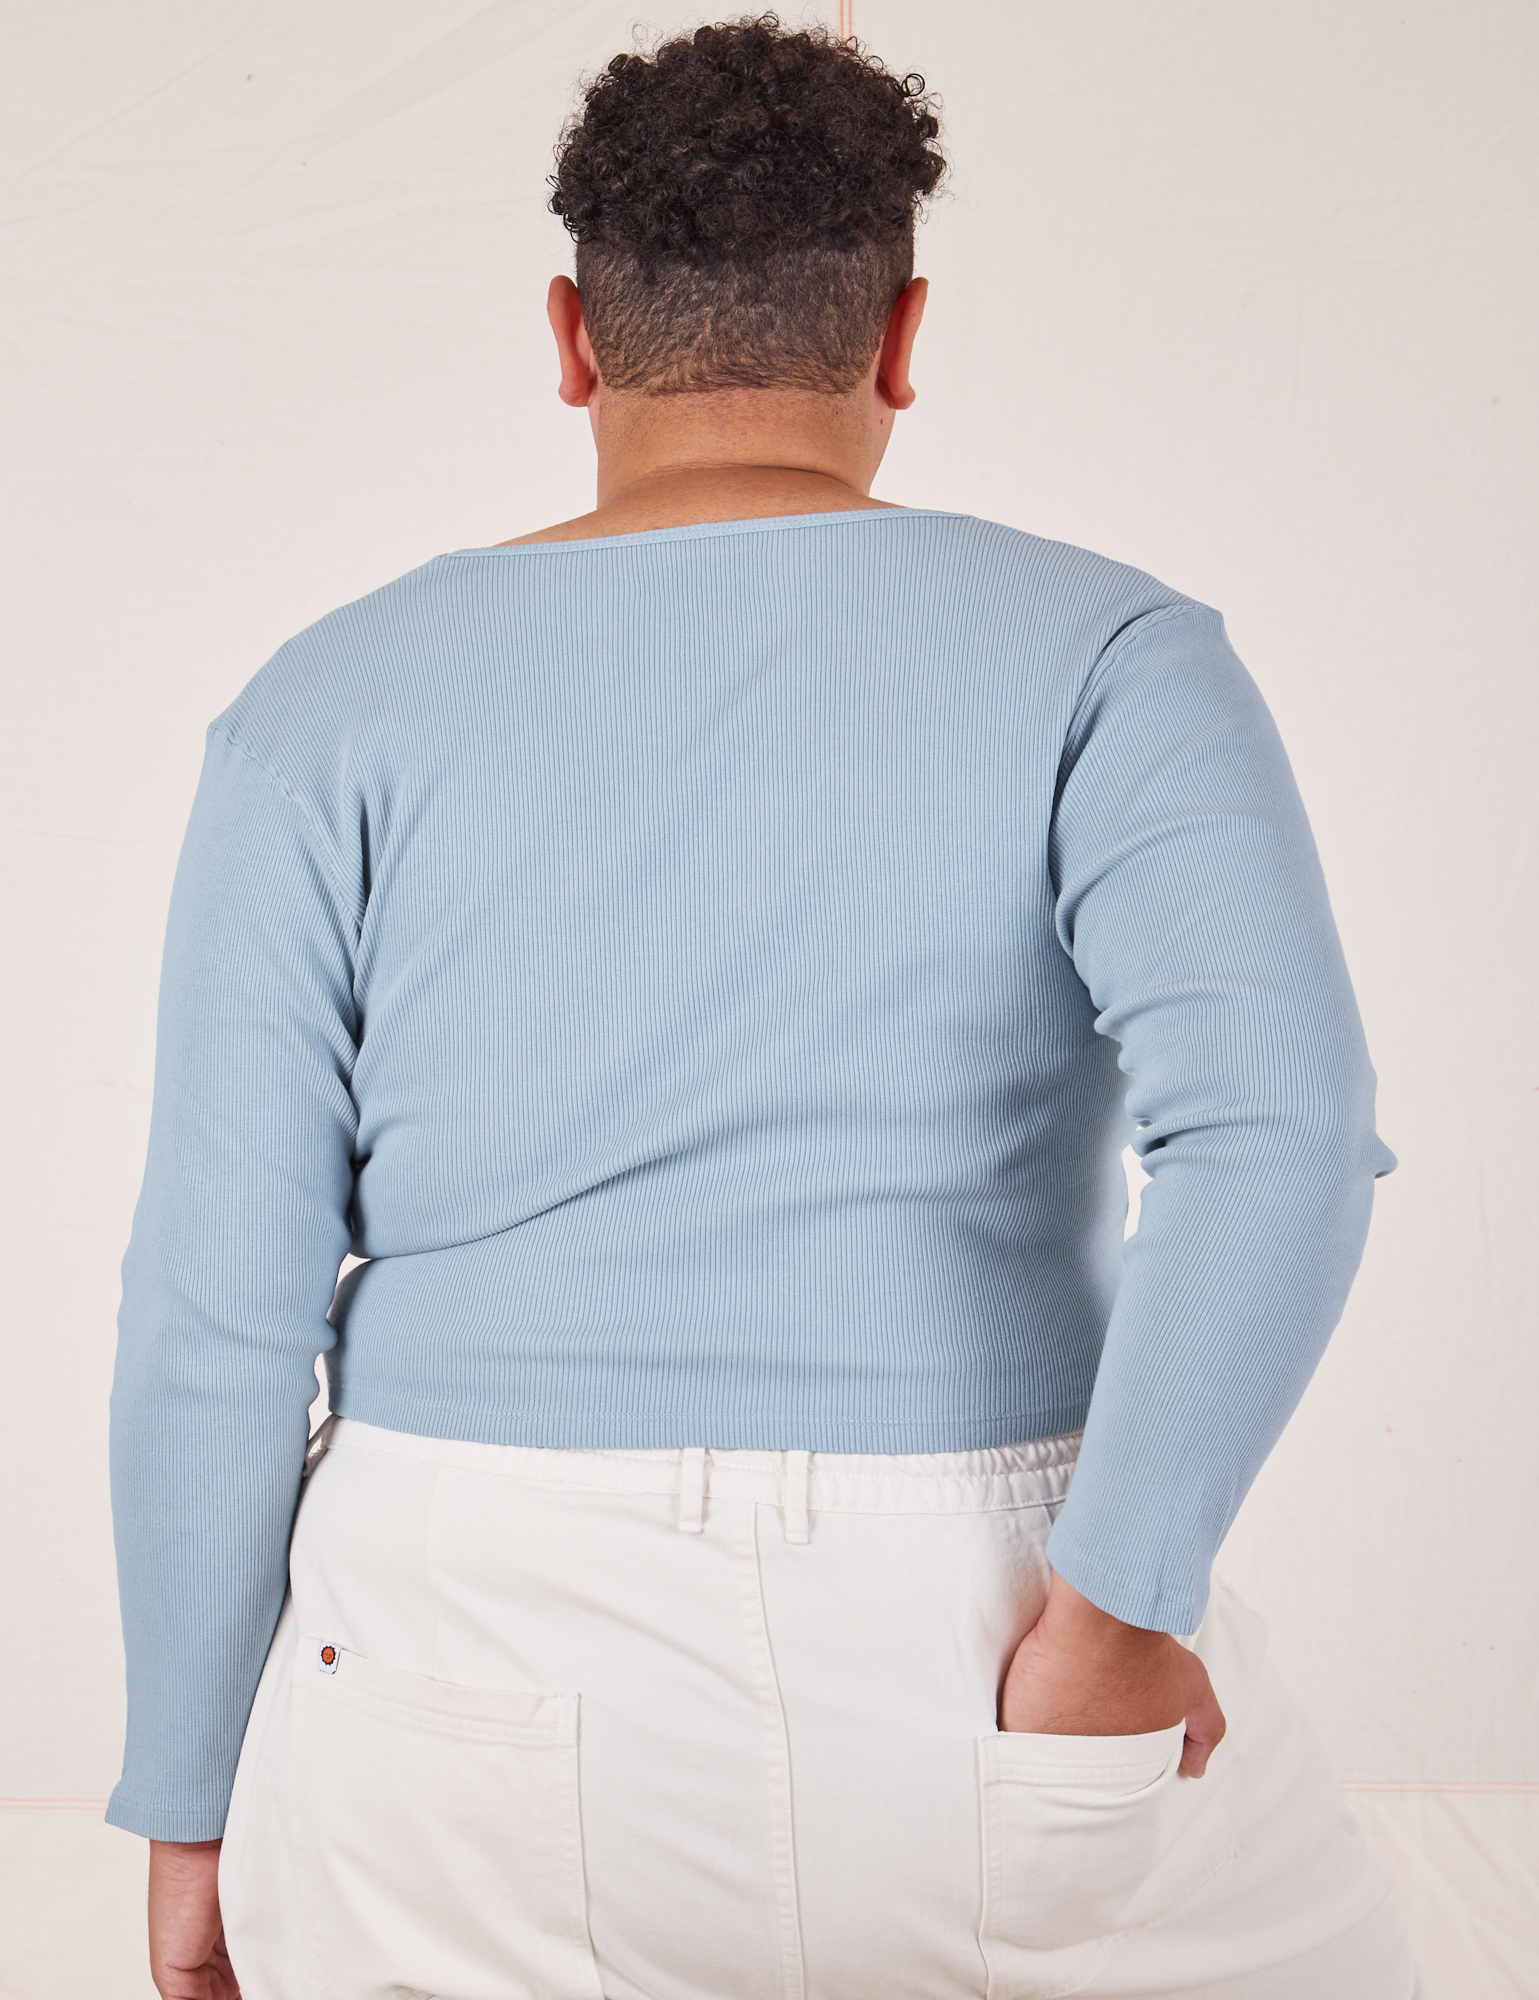 Back view of Long Sleeve V-Neck Tee in Periwinkle on Miguel